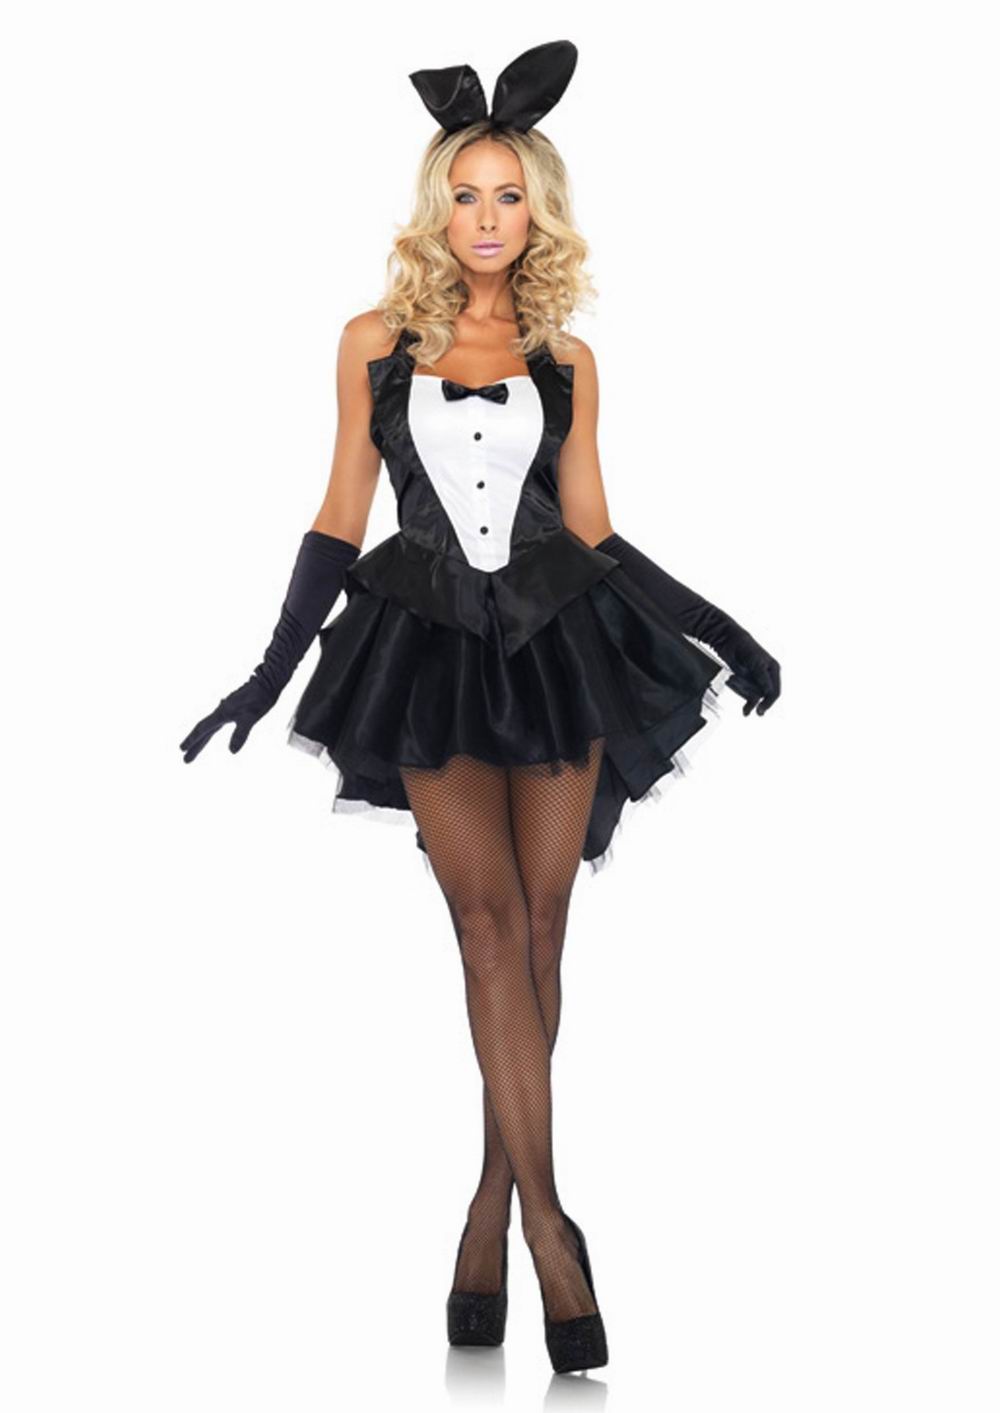 Tux & Tails Bunny Costume